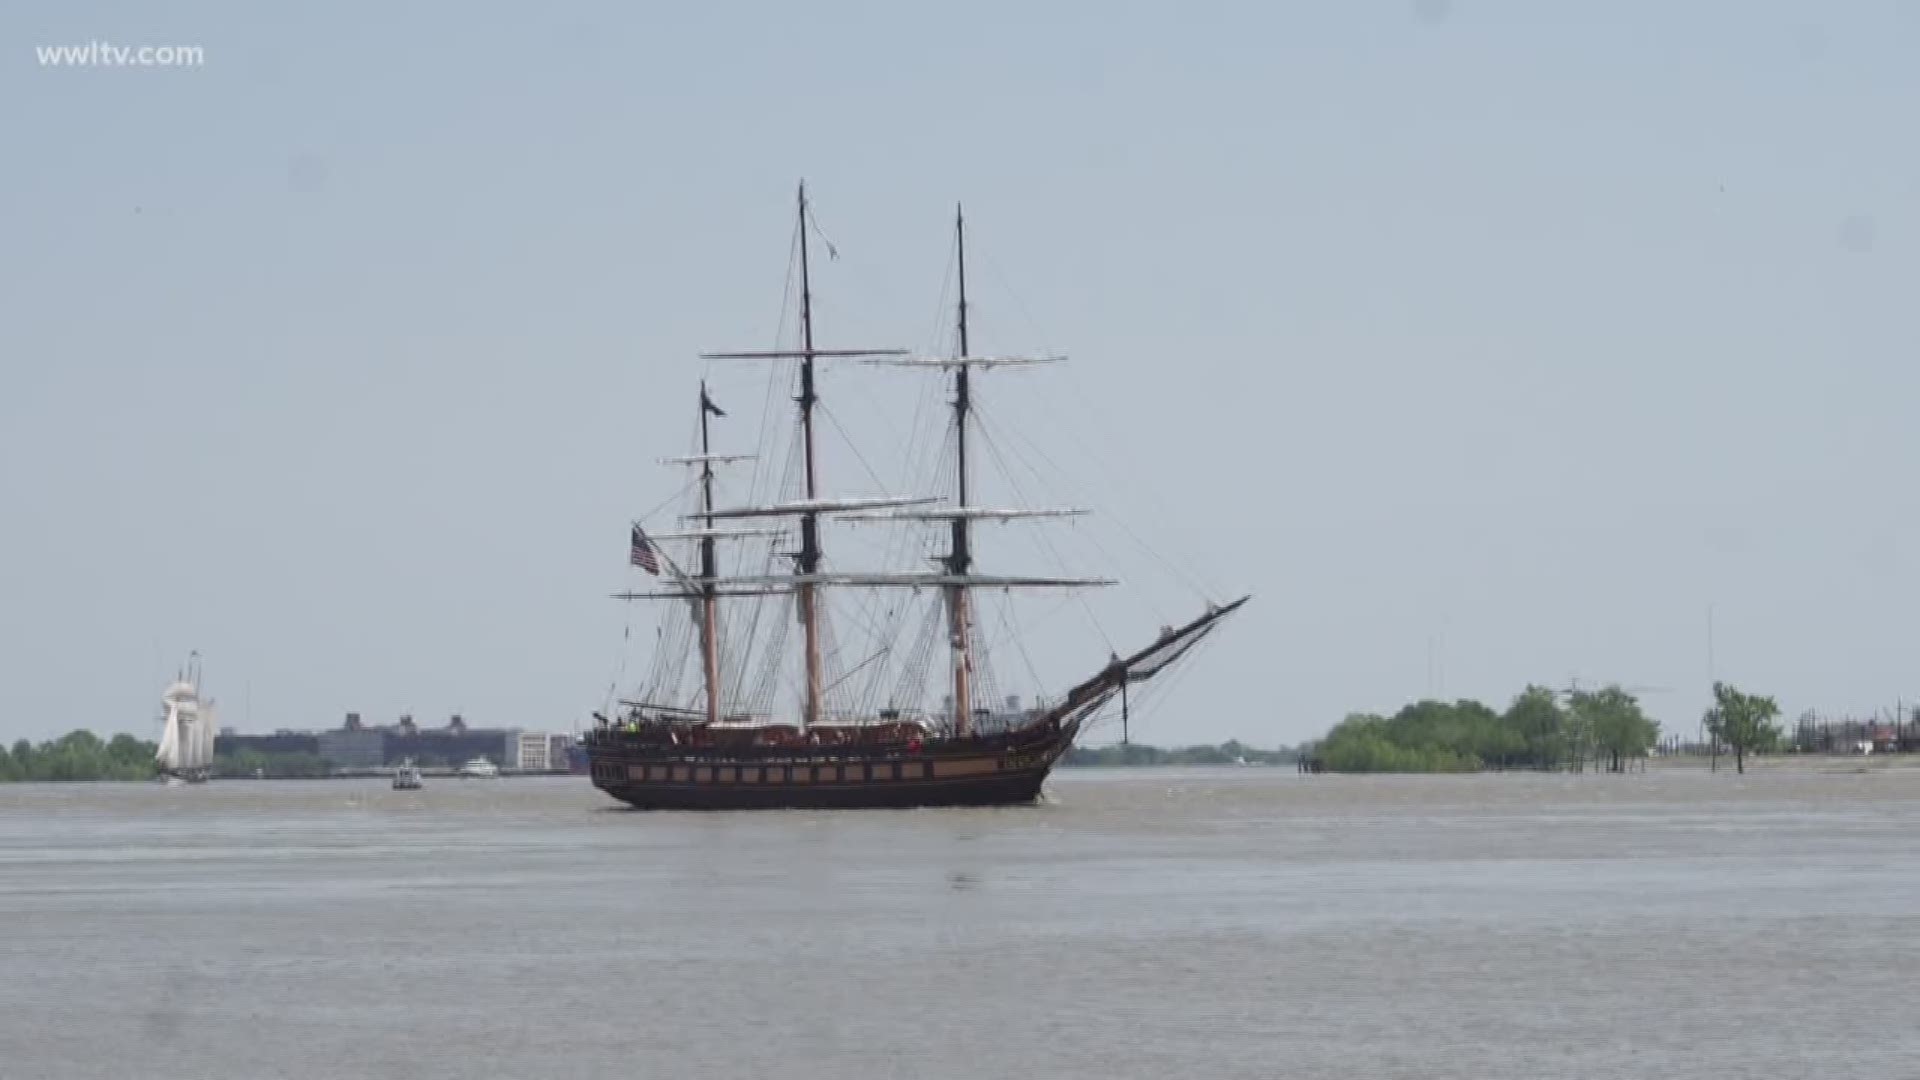 Tall ships herald New Orleans' 300th anniversary